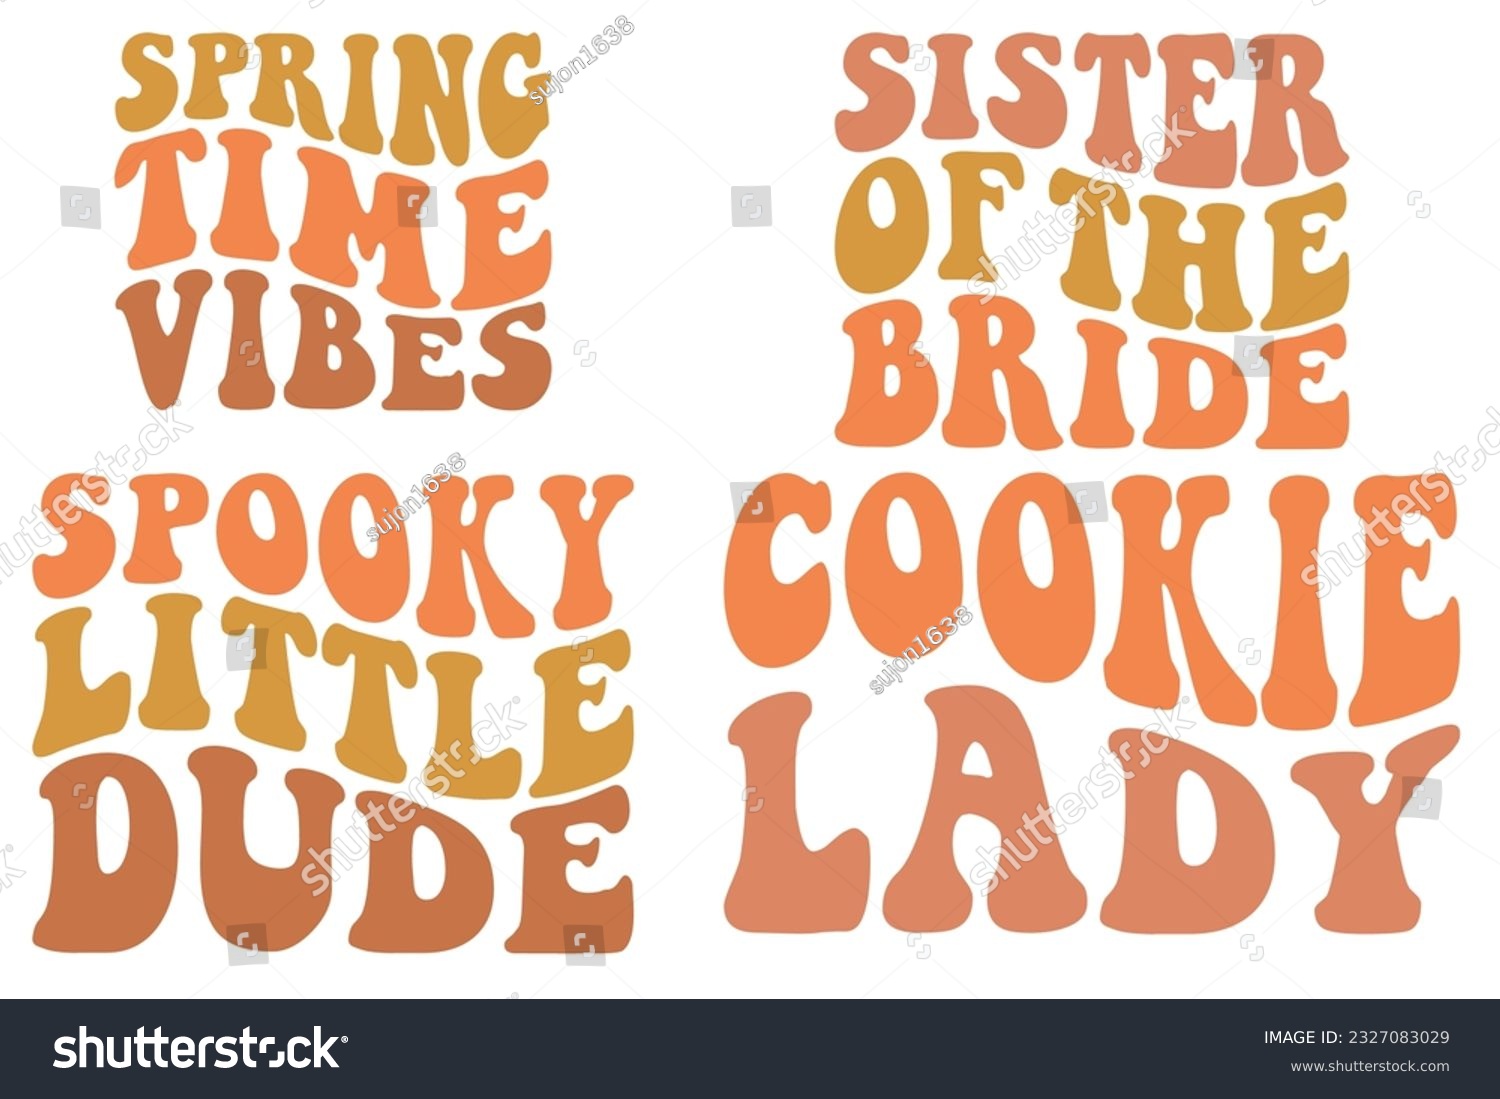 SVG of Spring Time Vibes, Sister of the Bride, Spooky Little Dude, Cookie Lady wavy SVG bundle T-shirt svg